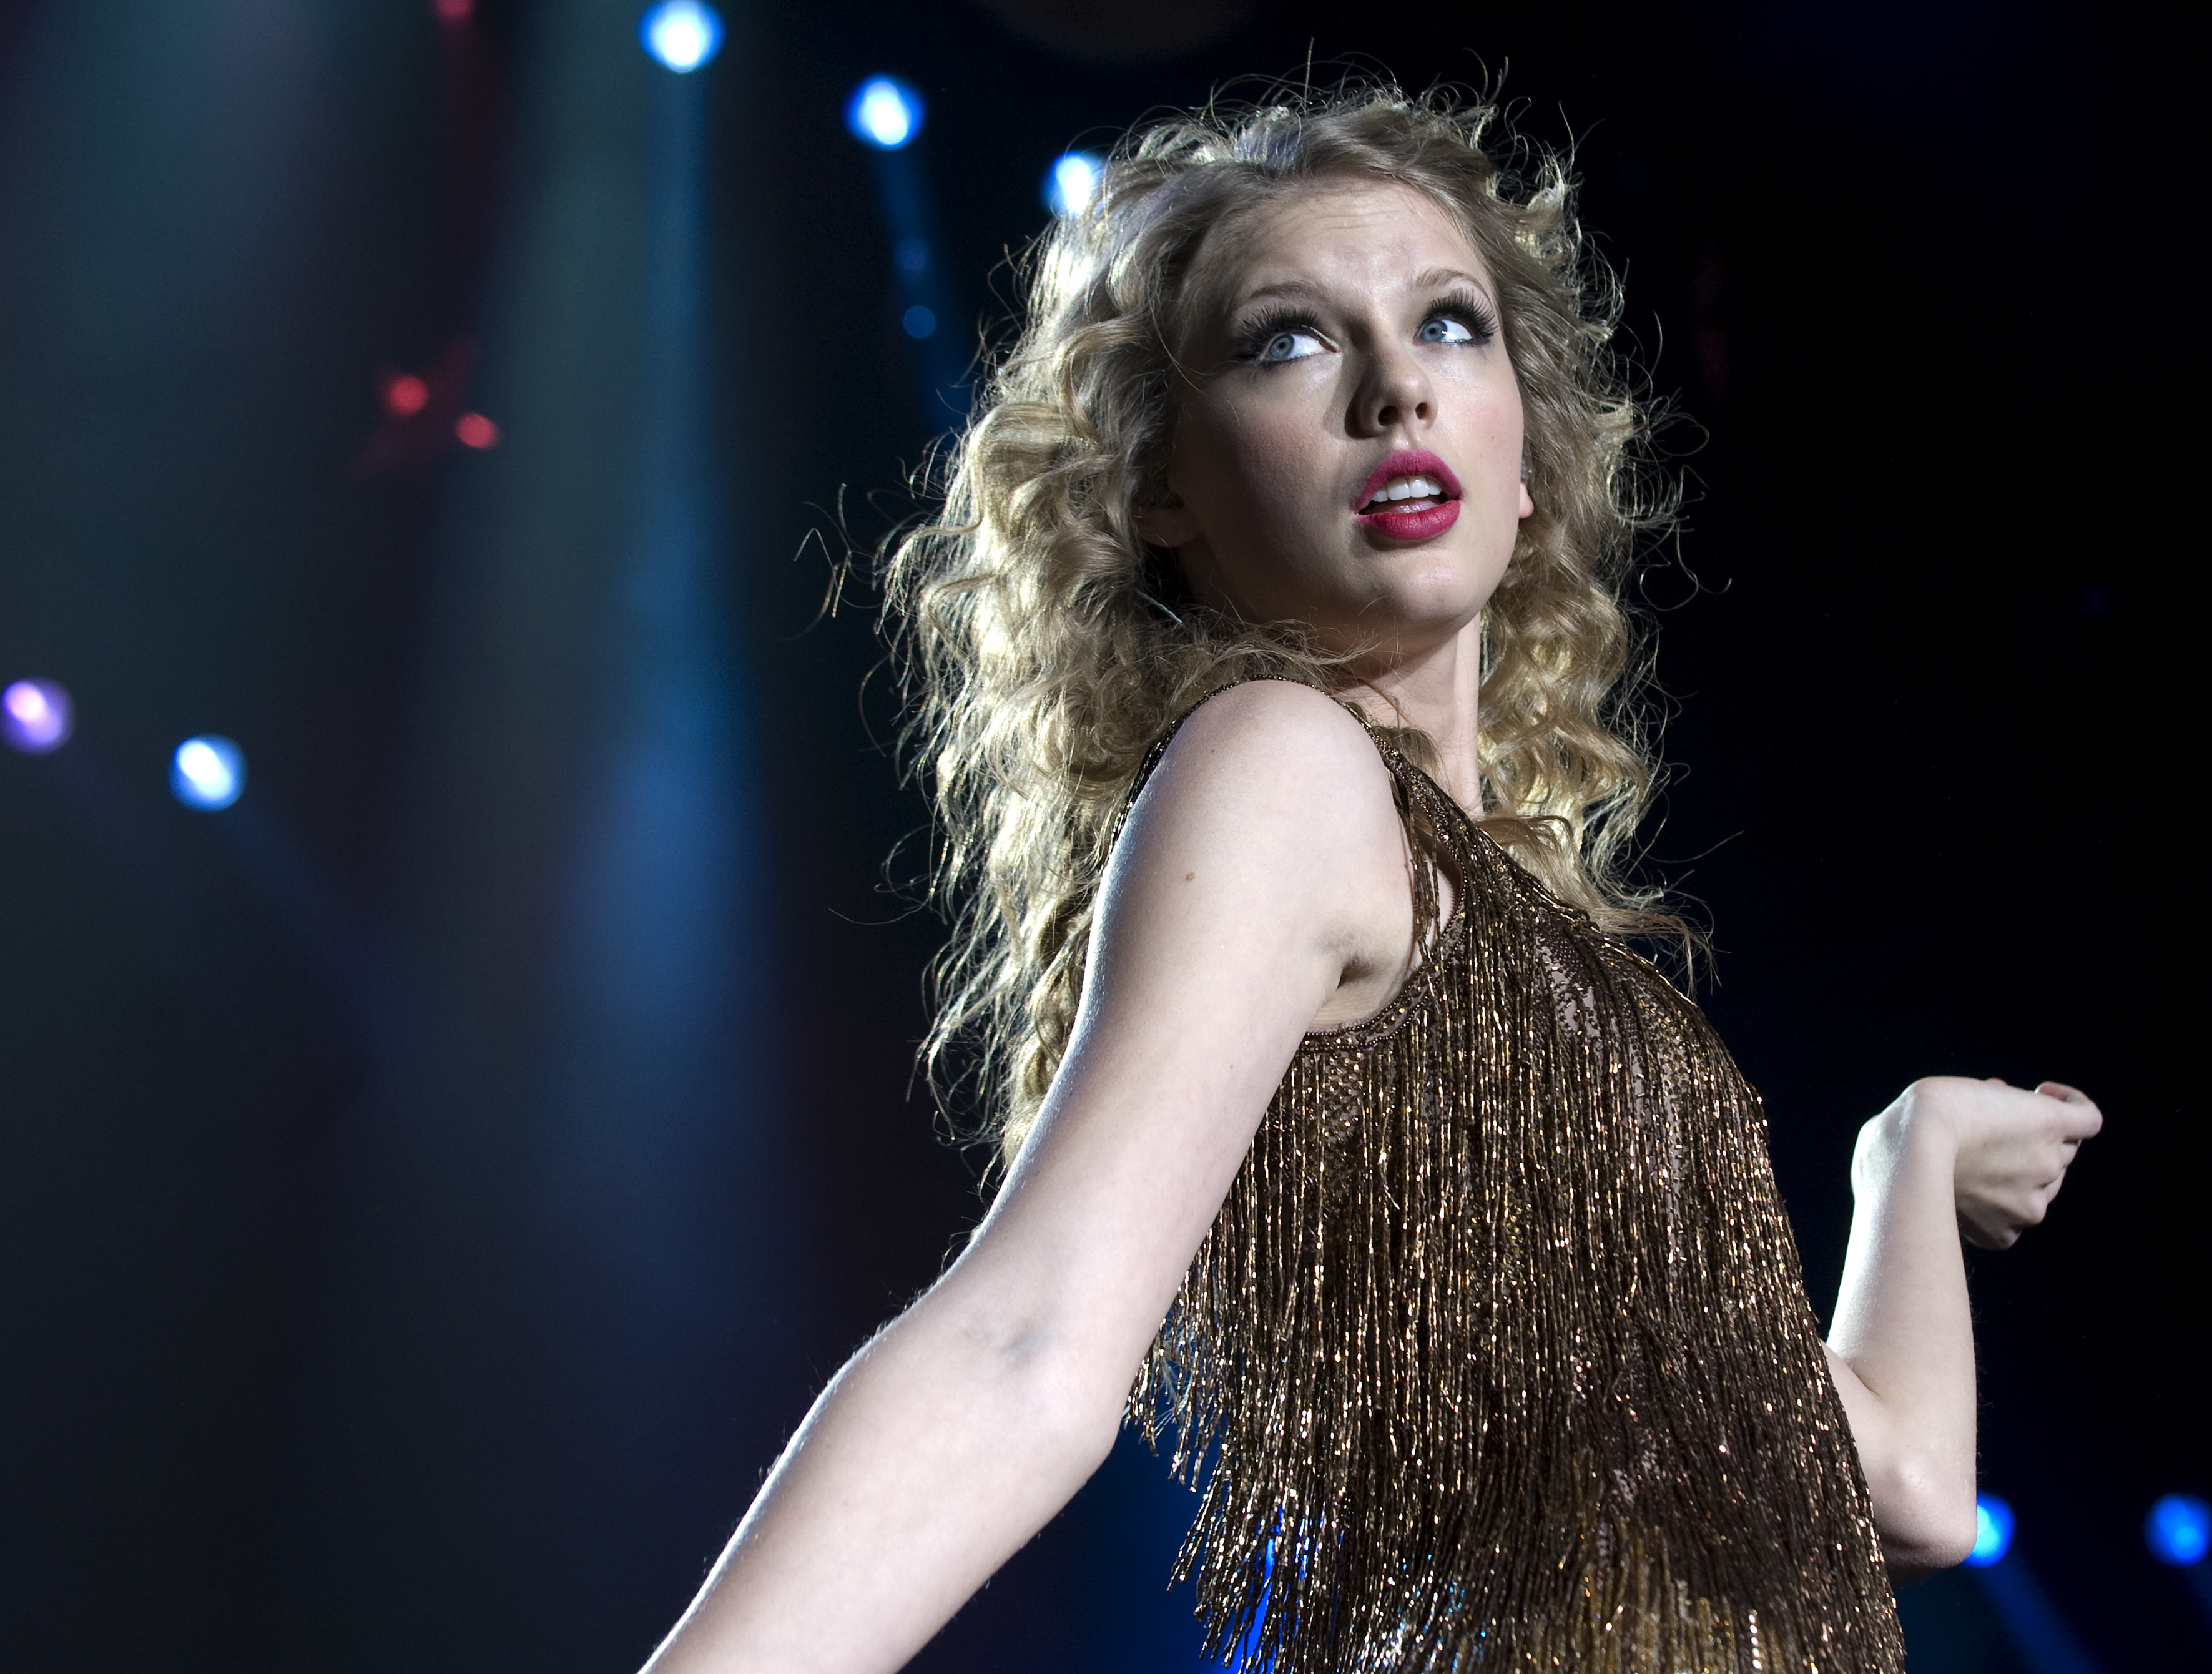 Taylor Swift performs live on stage at Ahoy in Rotterdam, Netherlands during her Speak Now World Tour on 7th March 2011. 